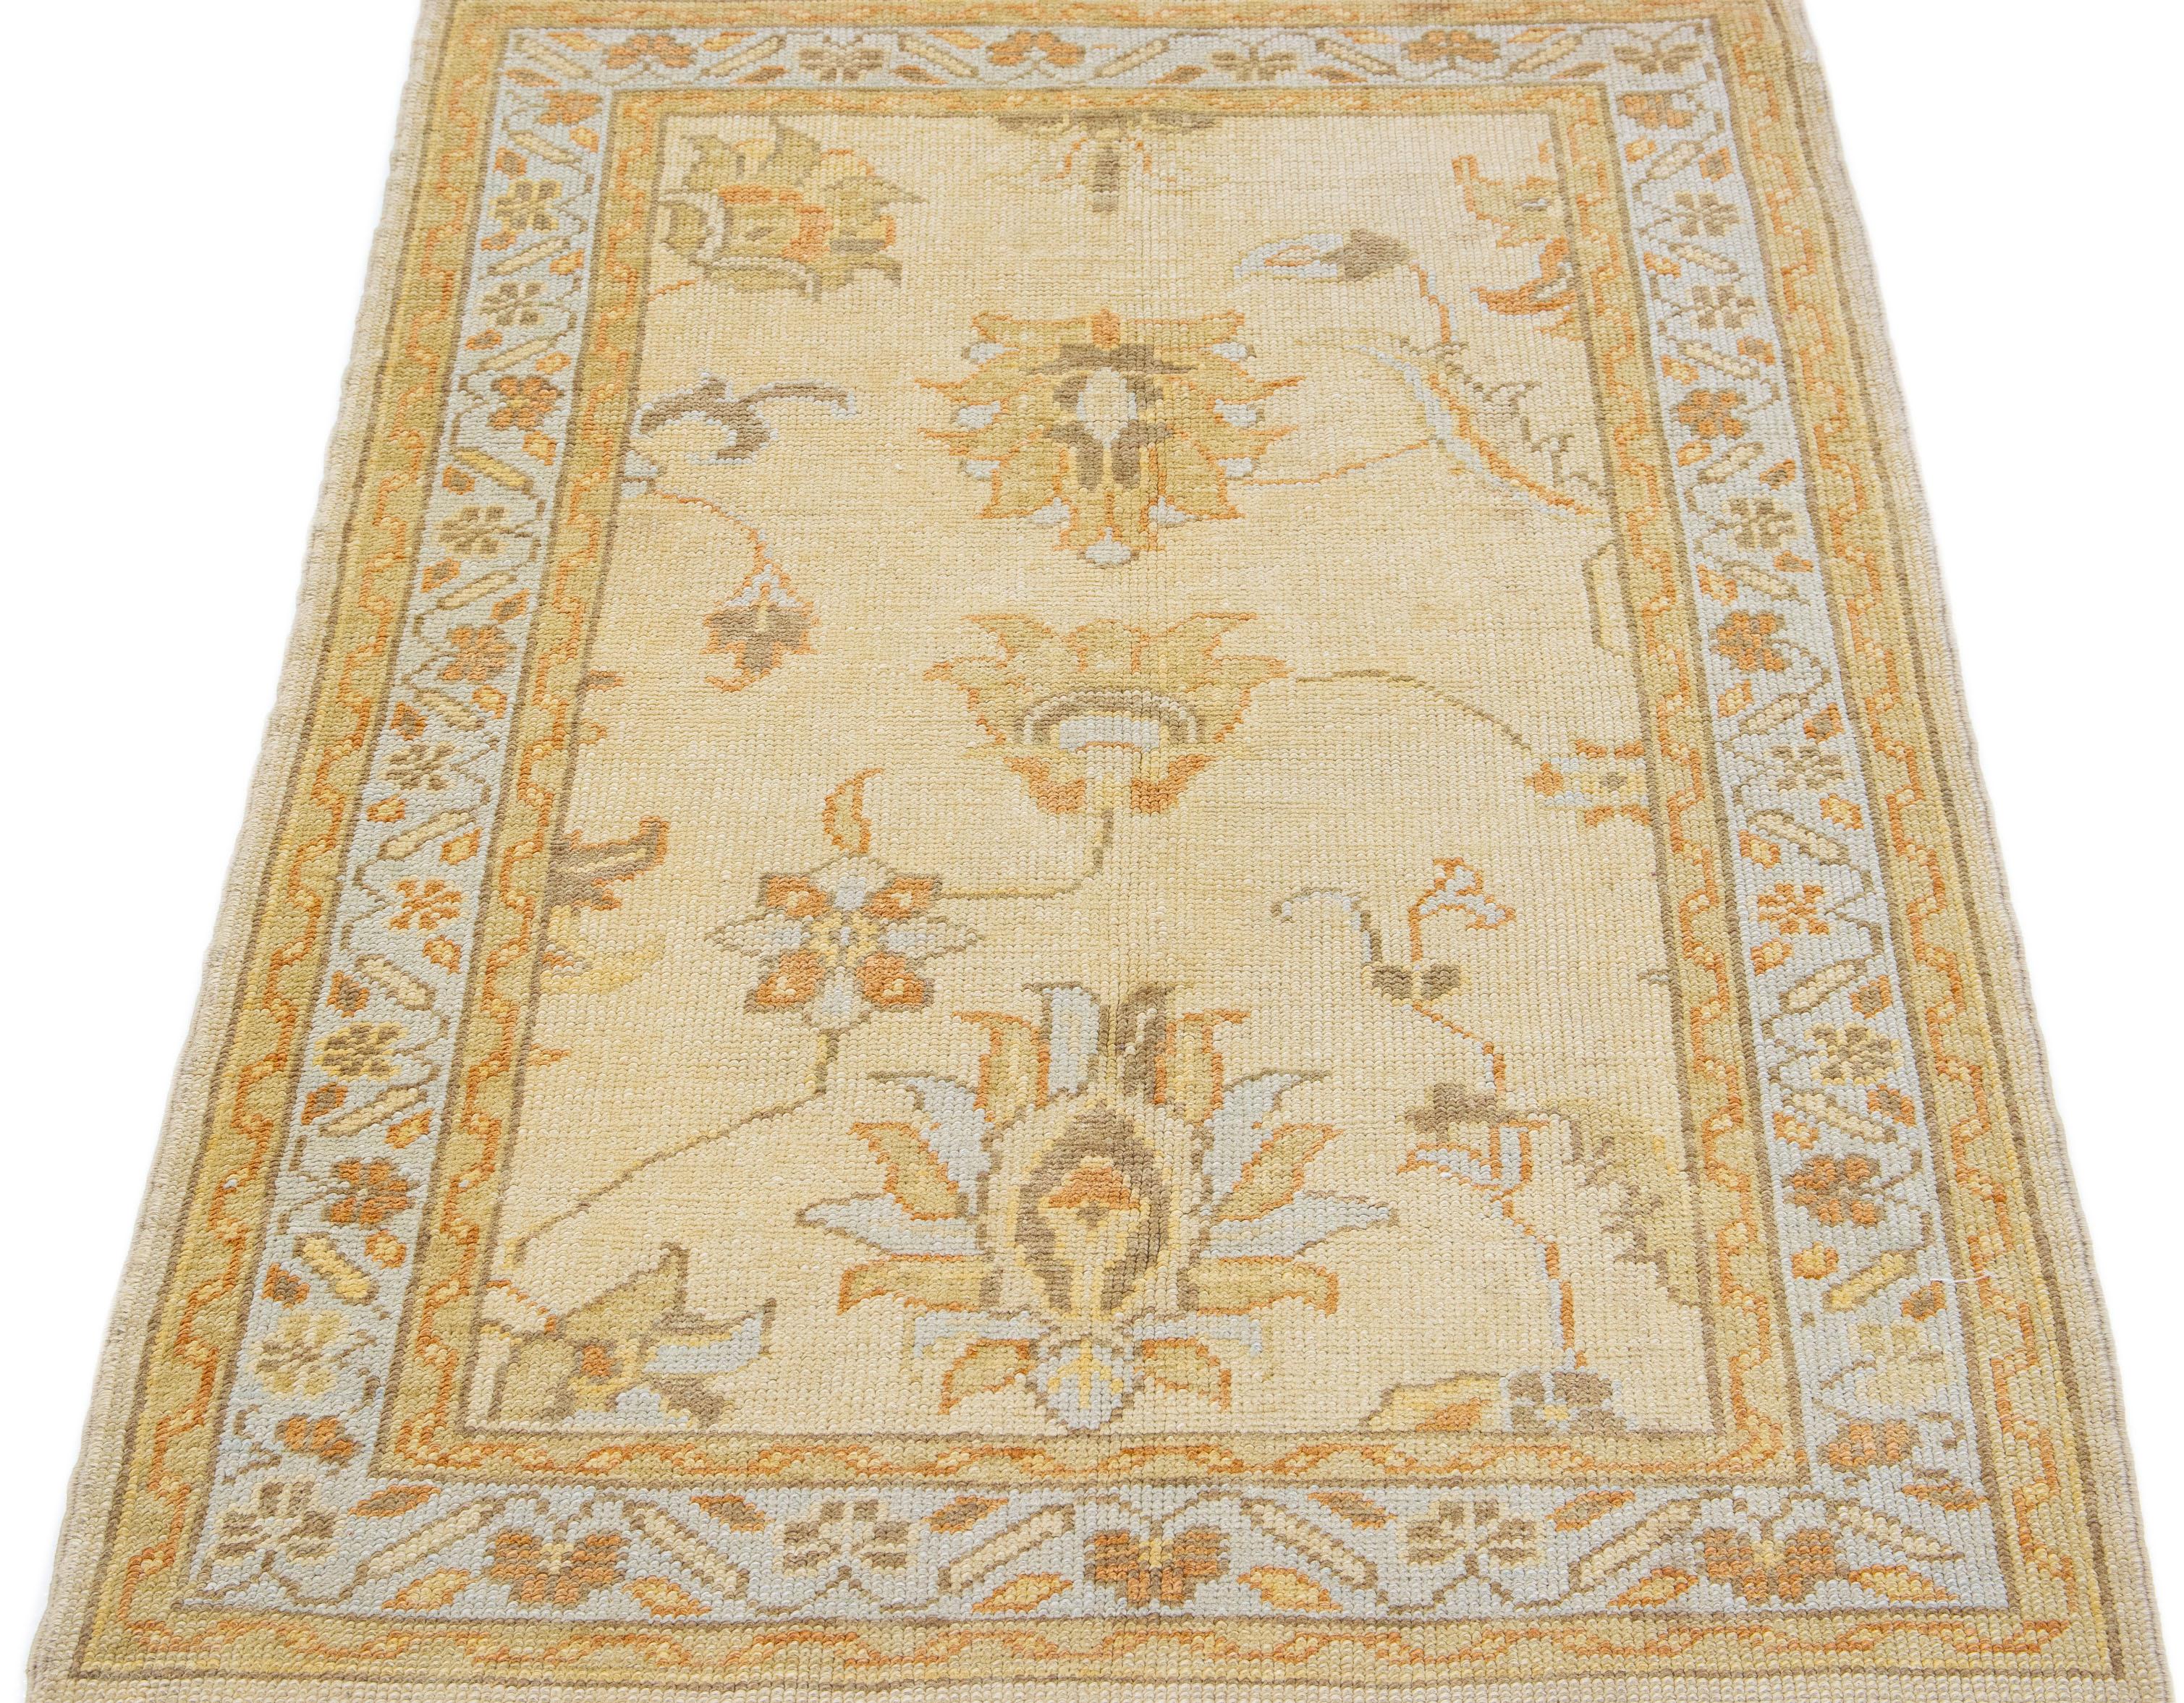 This woolen Oushak rug from Turkey boasts a modern aesthetic, featuring a delightful floral pattern in beige, gray, and orange shades.

This rug measures 3'6